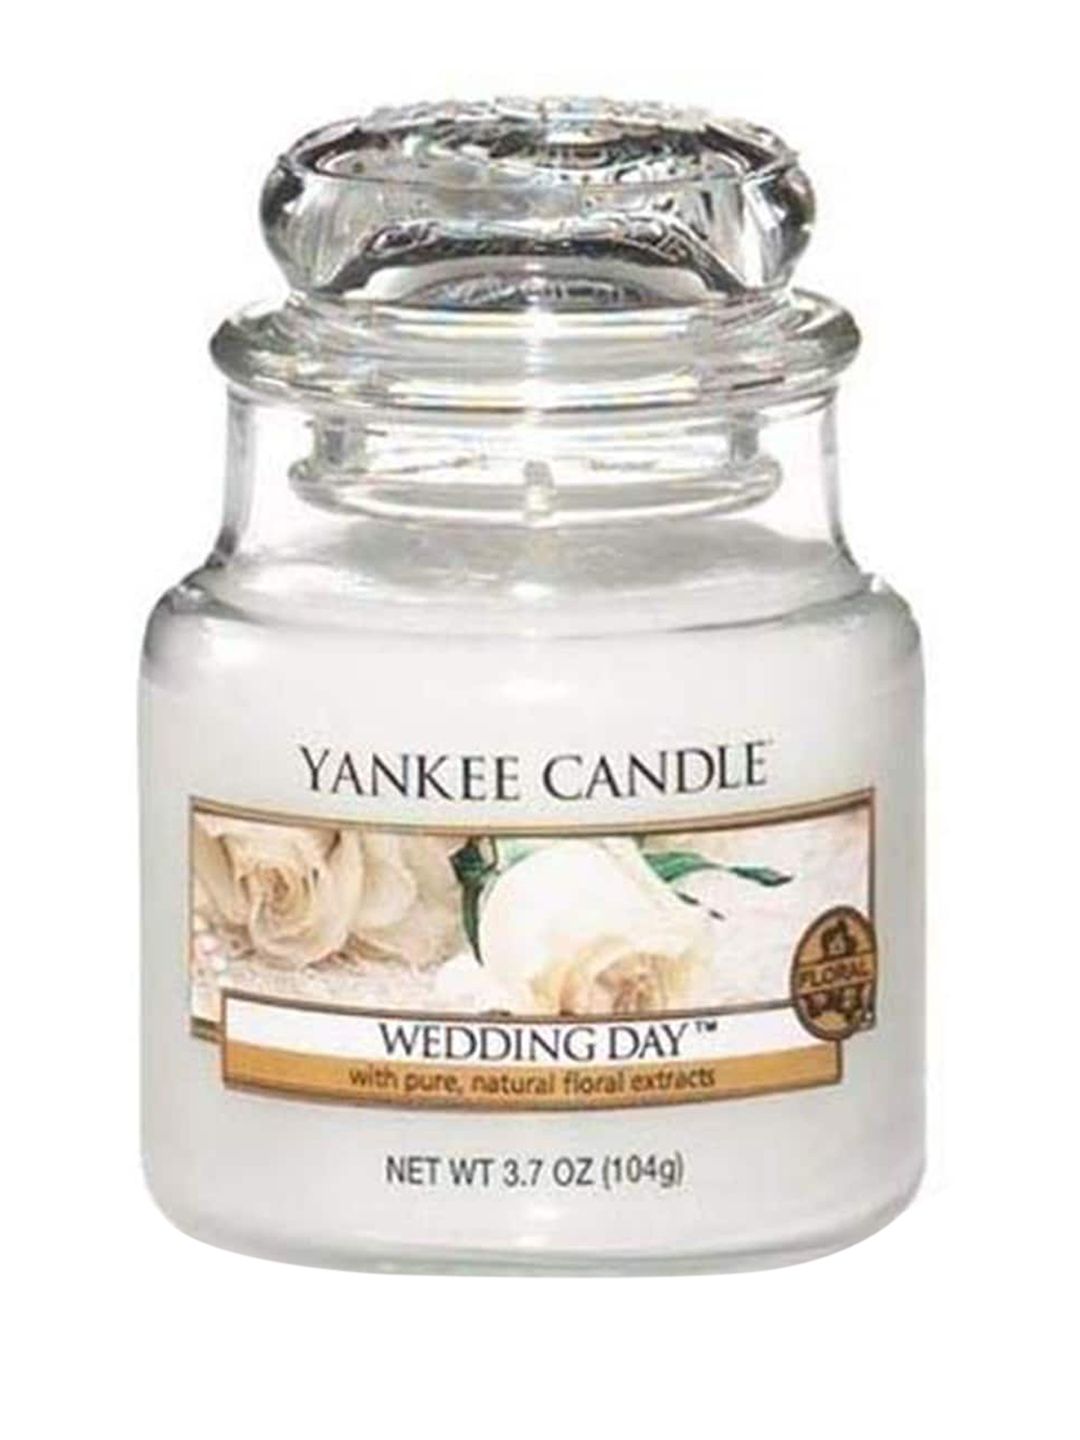 YANKEE CANDLE White Classic Weeding Day Rose Scented Small Jar Candle Price in India